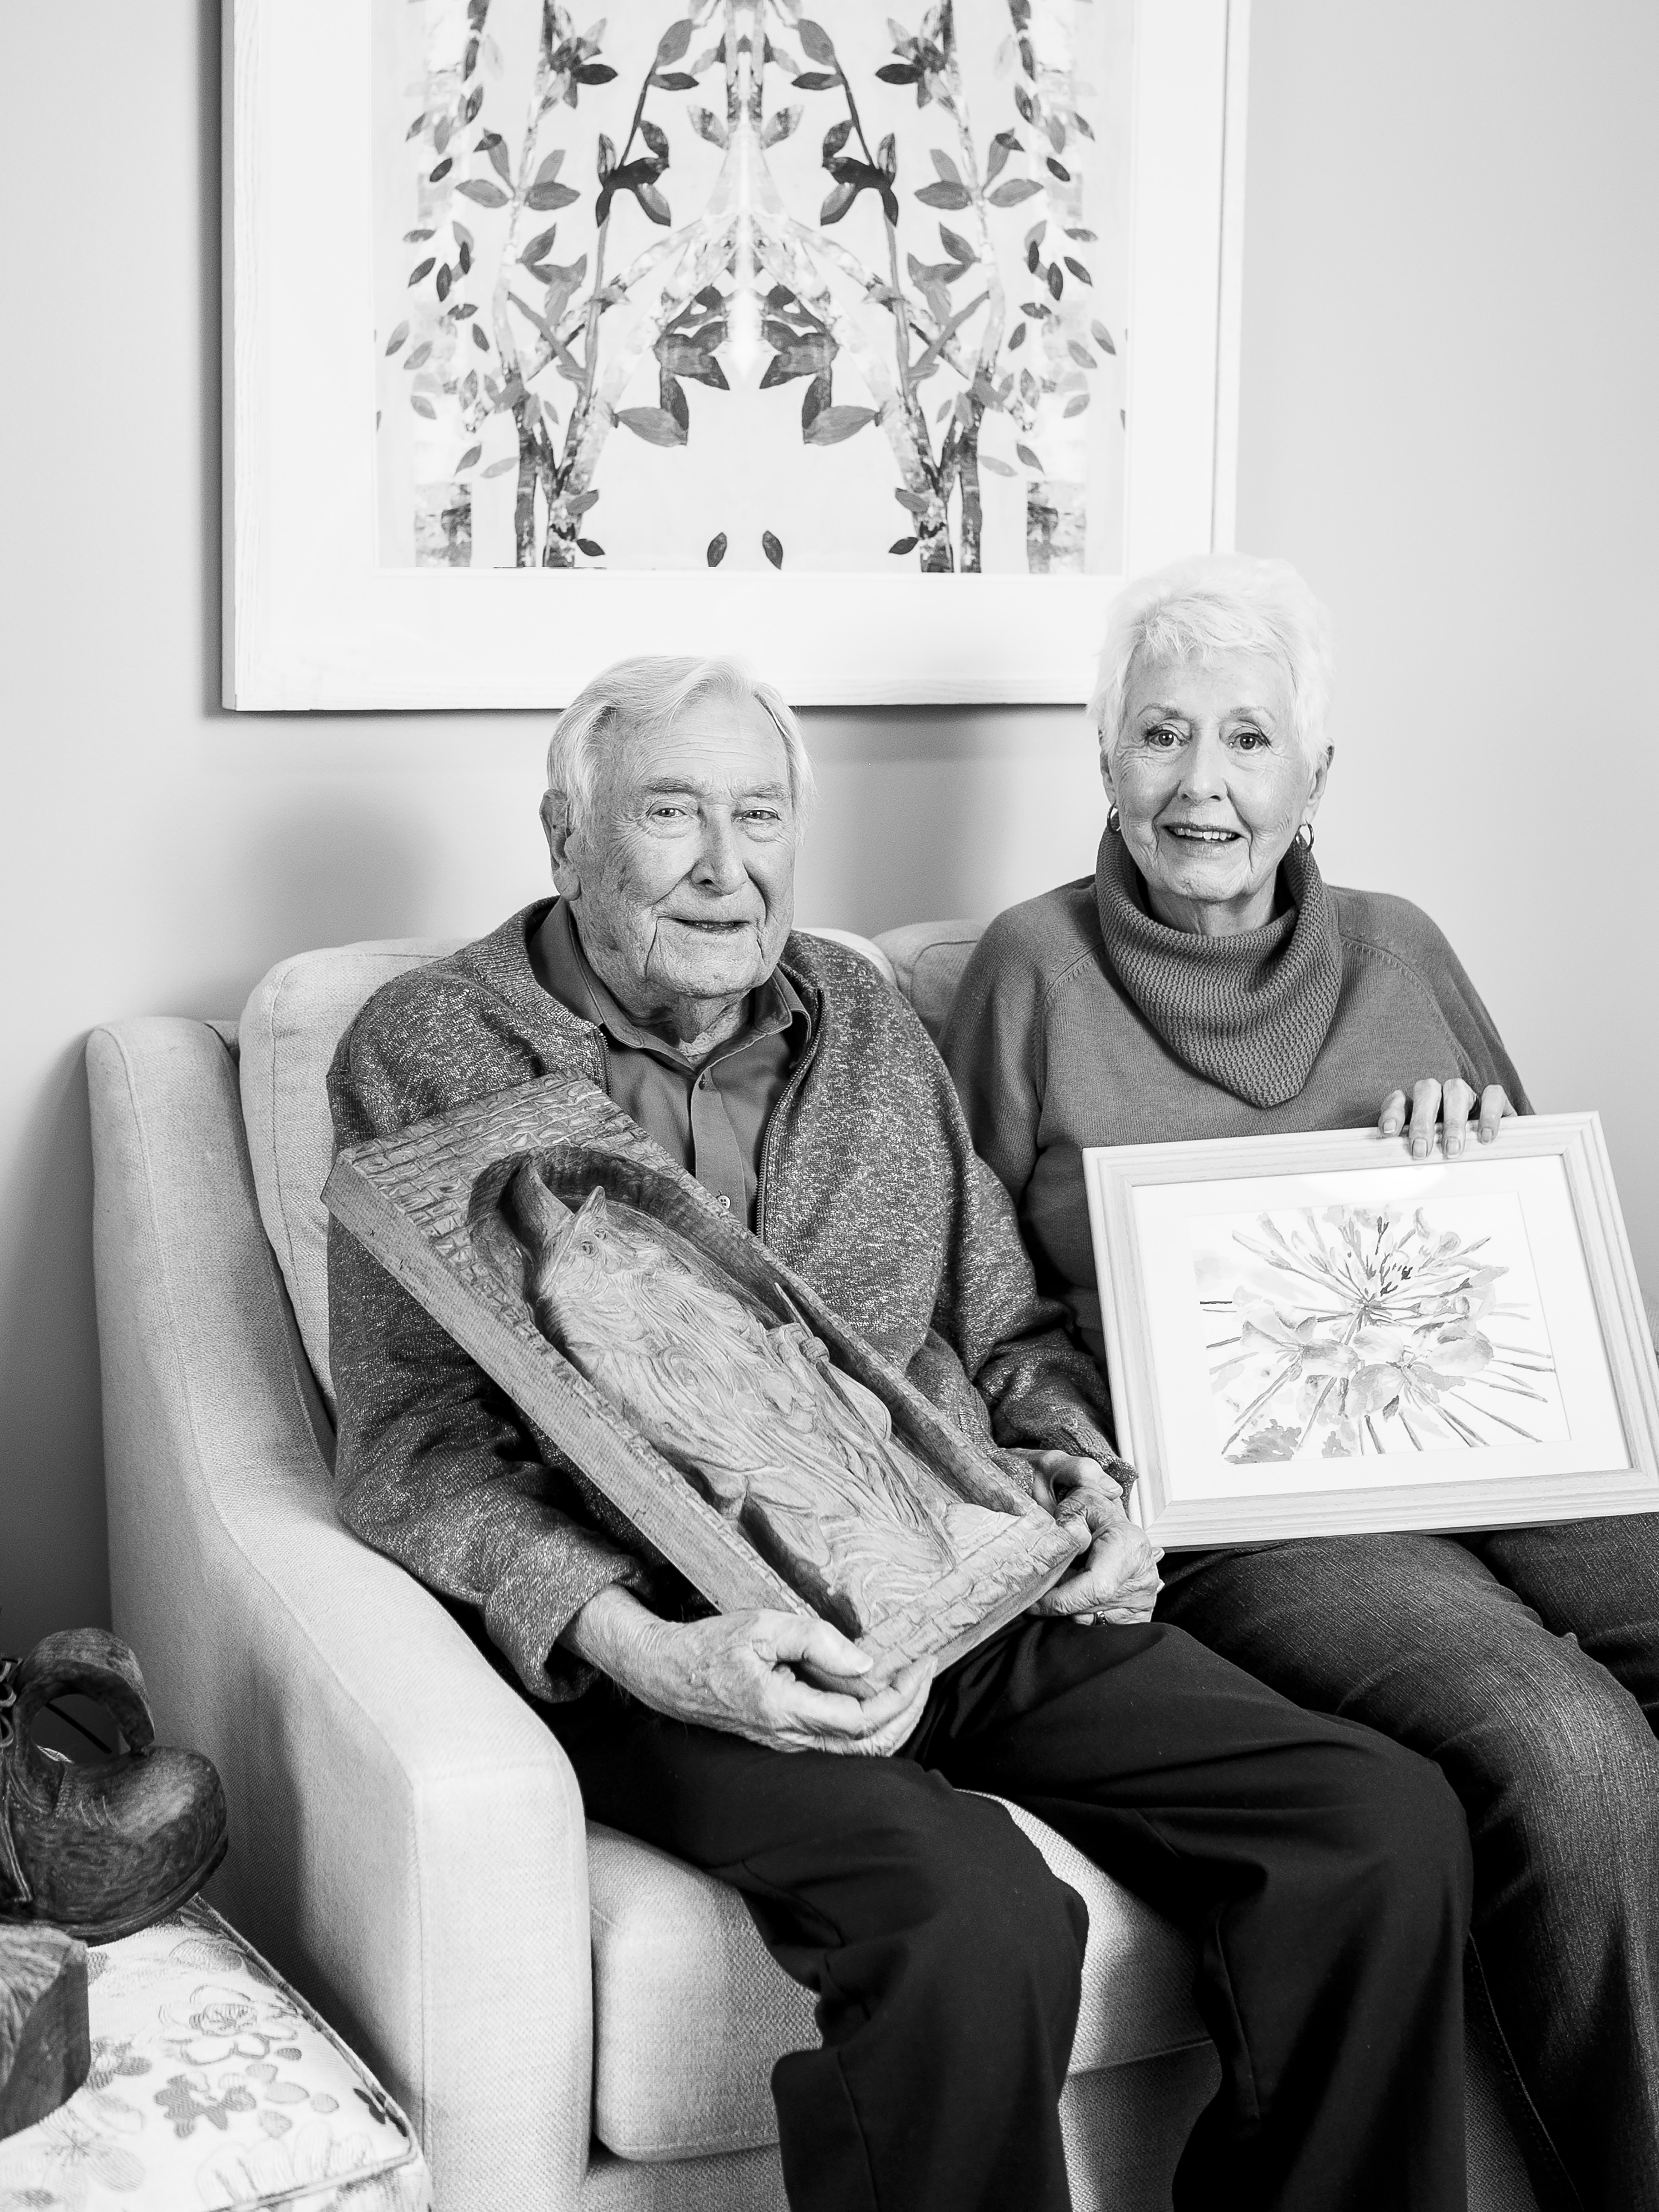 John and Doris sit together showcasing some of the art they create.